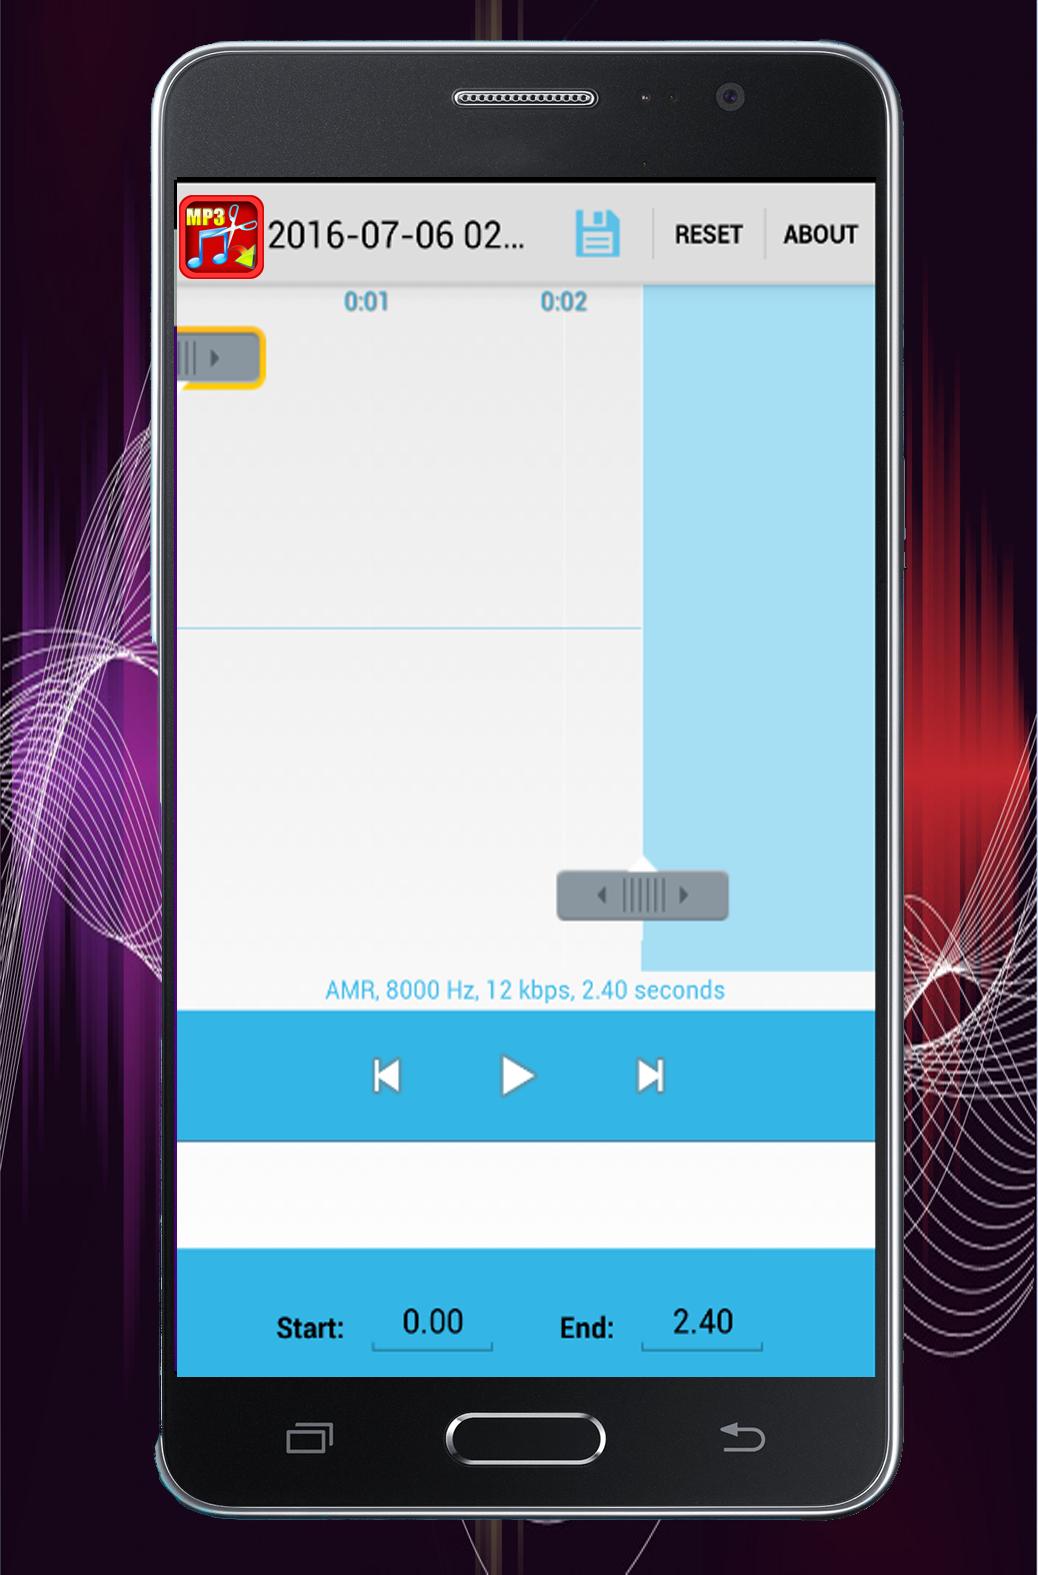 MP3 Cutter Plus for Android - APK Download